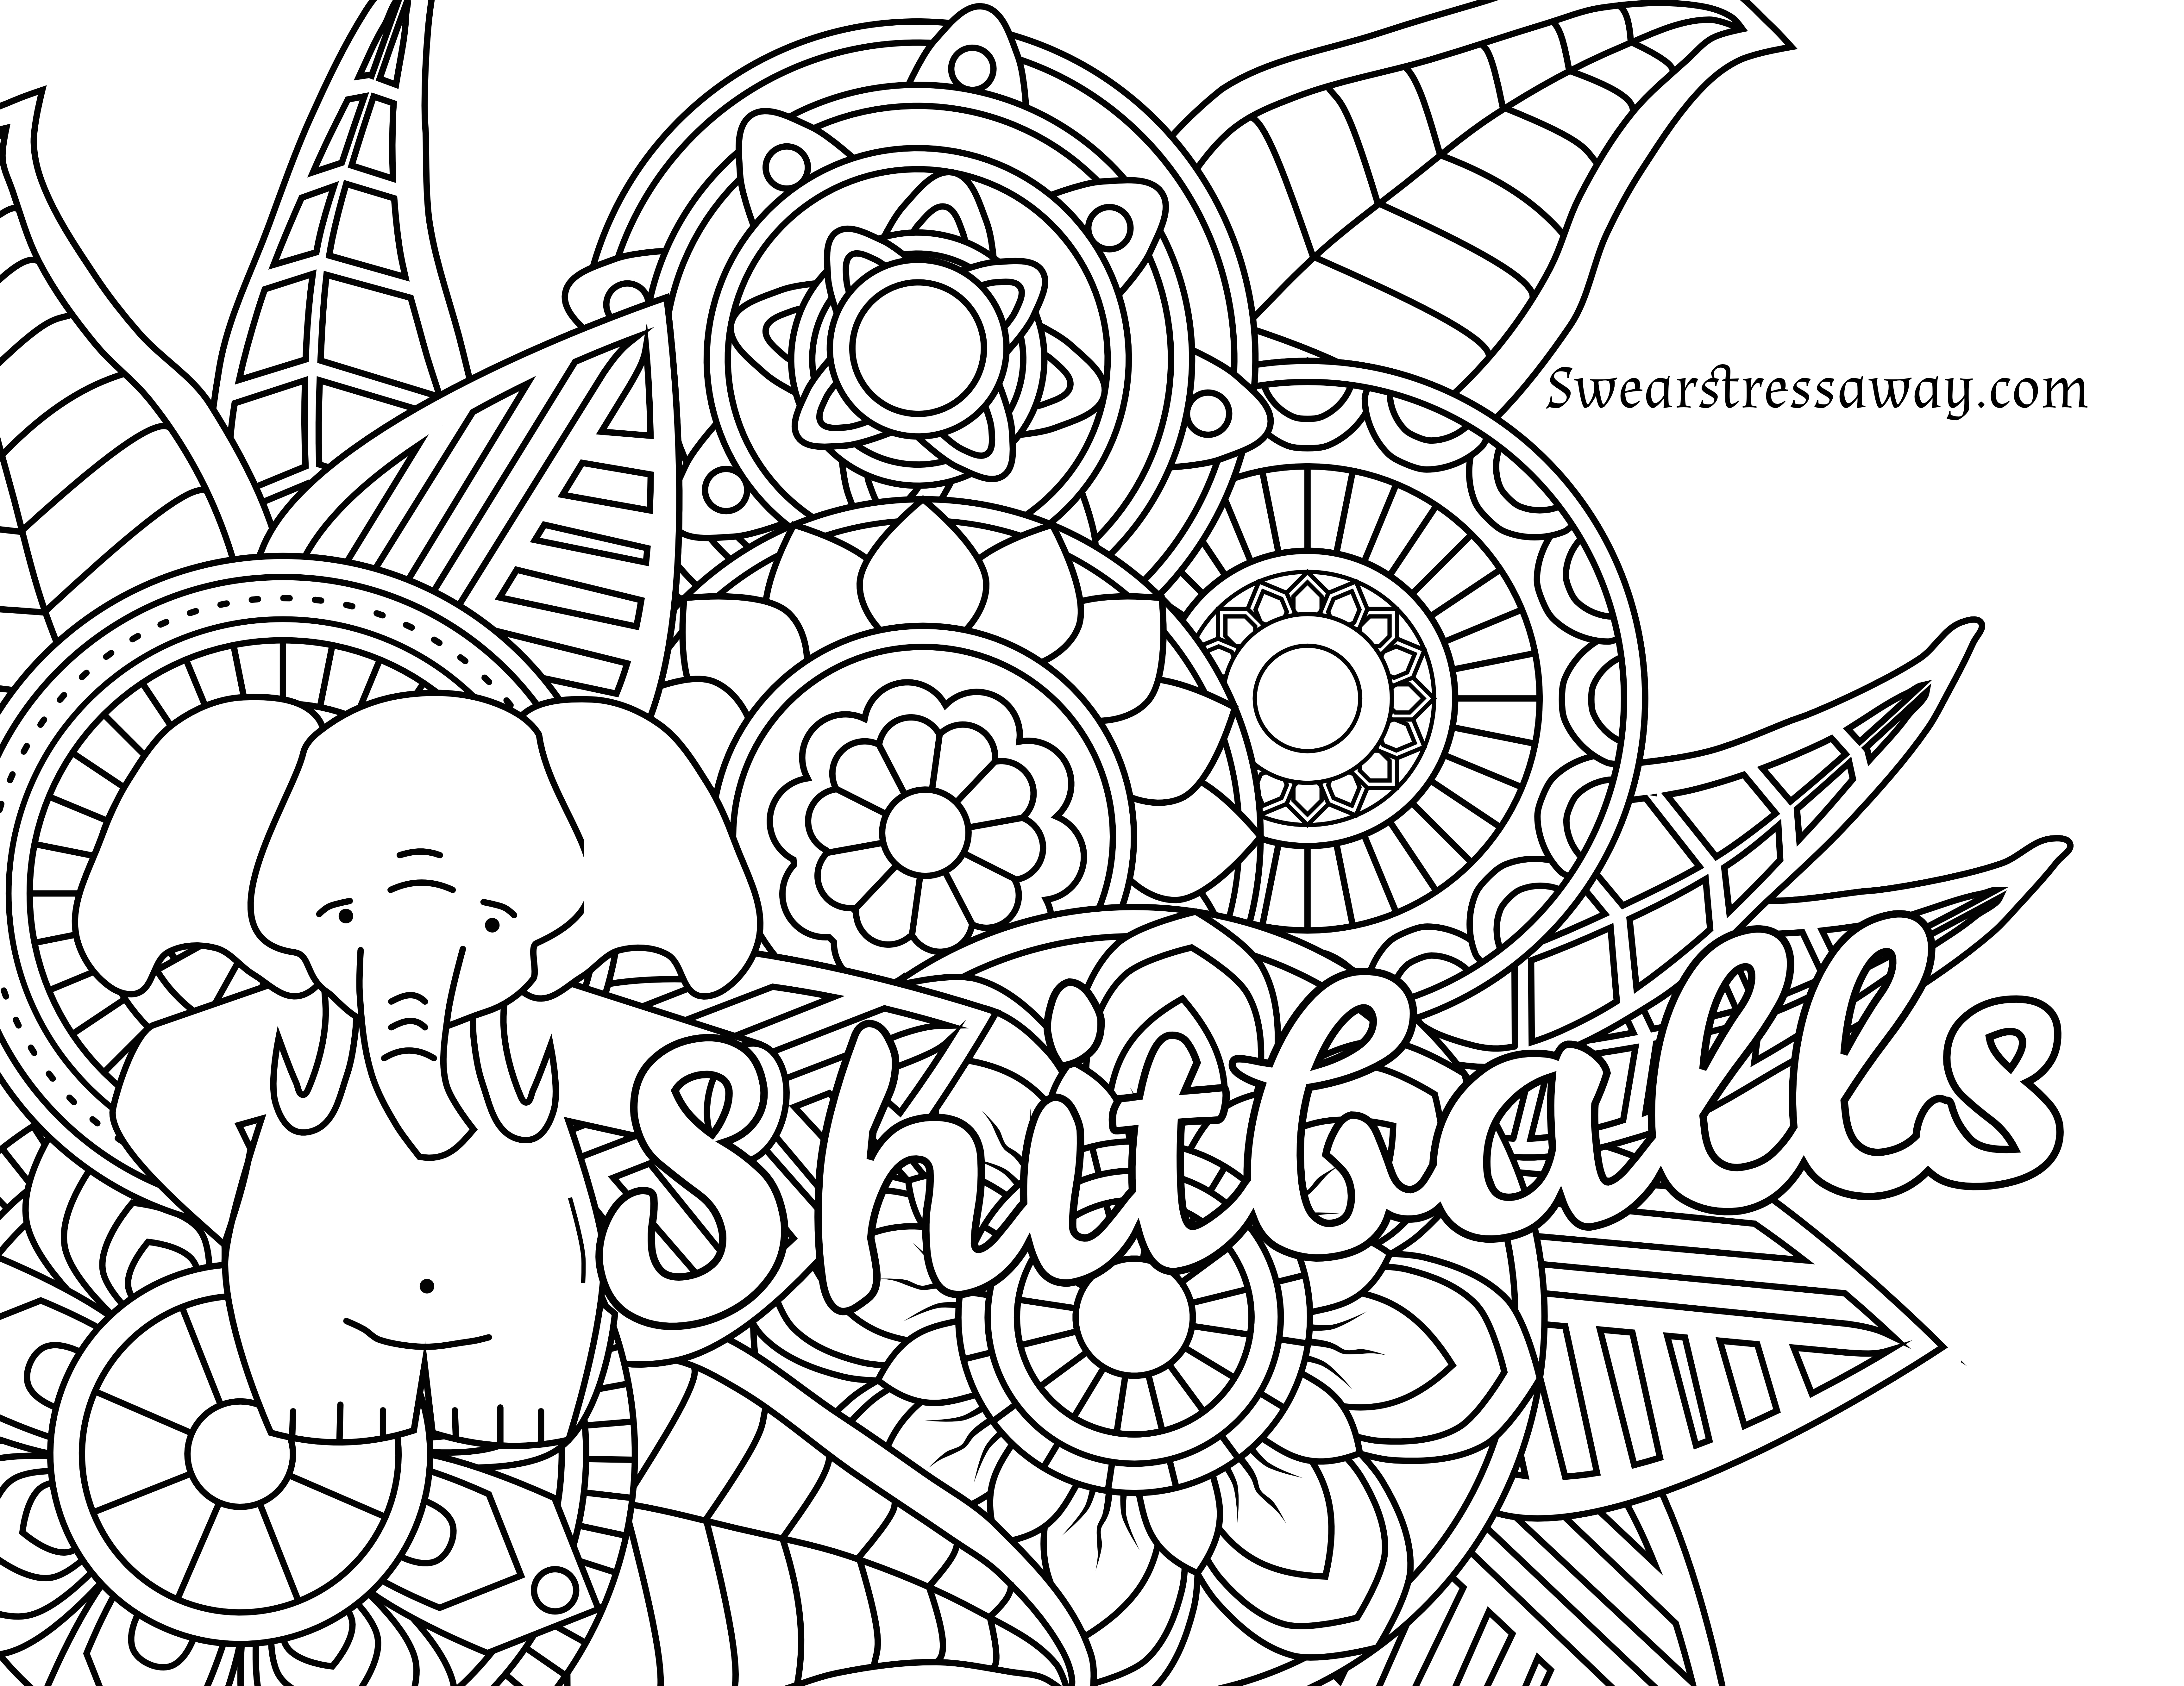 Coloring Page: 30 Printable Coloring Sheets For Adults. - Free Printable Coloring Pages For Adults